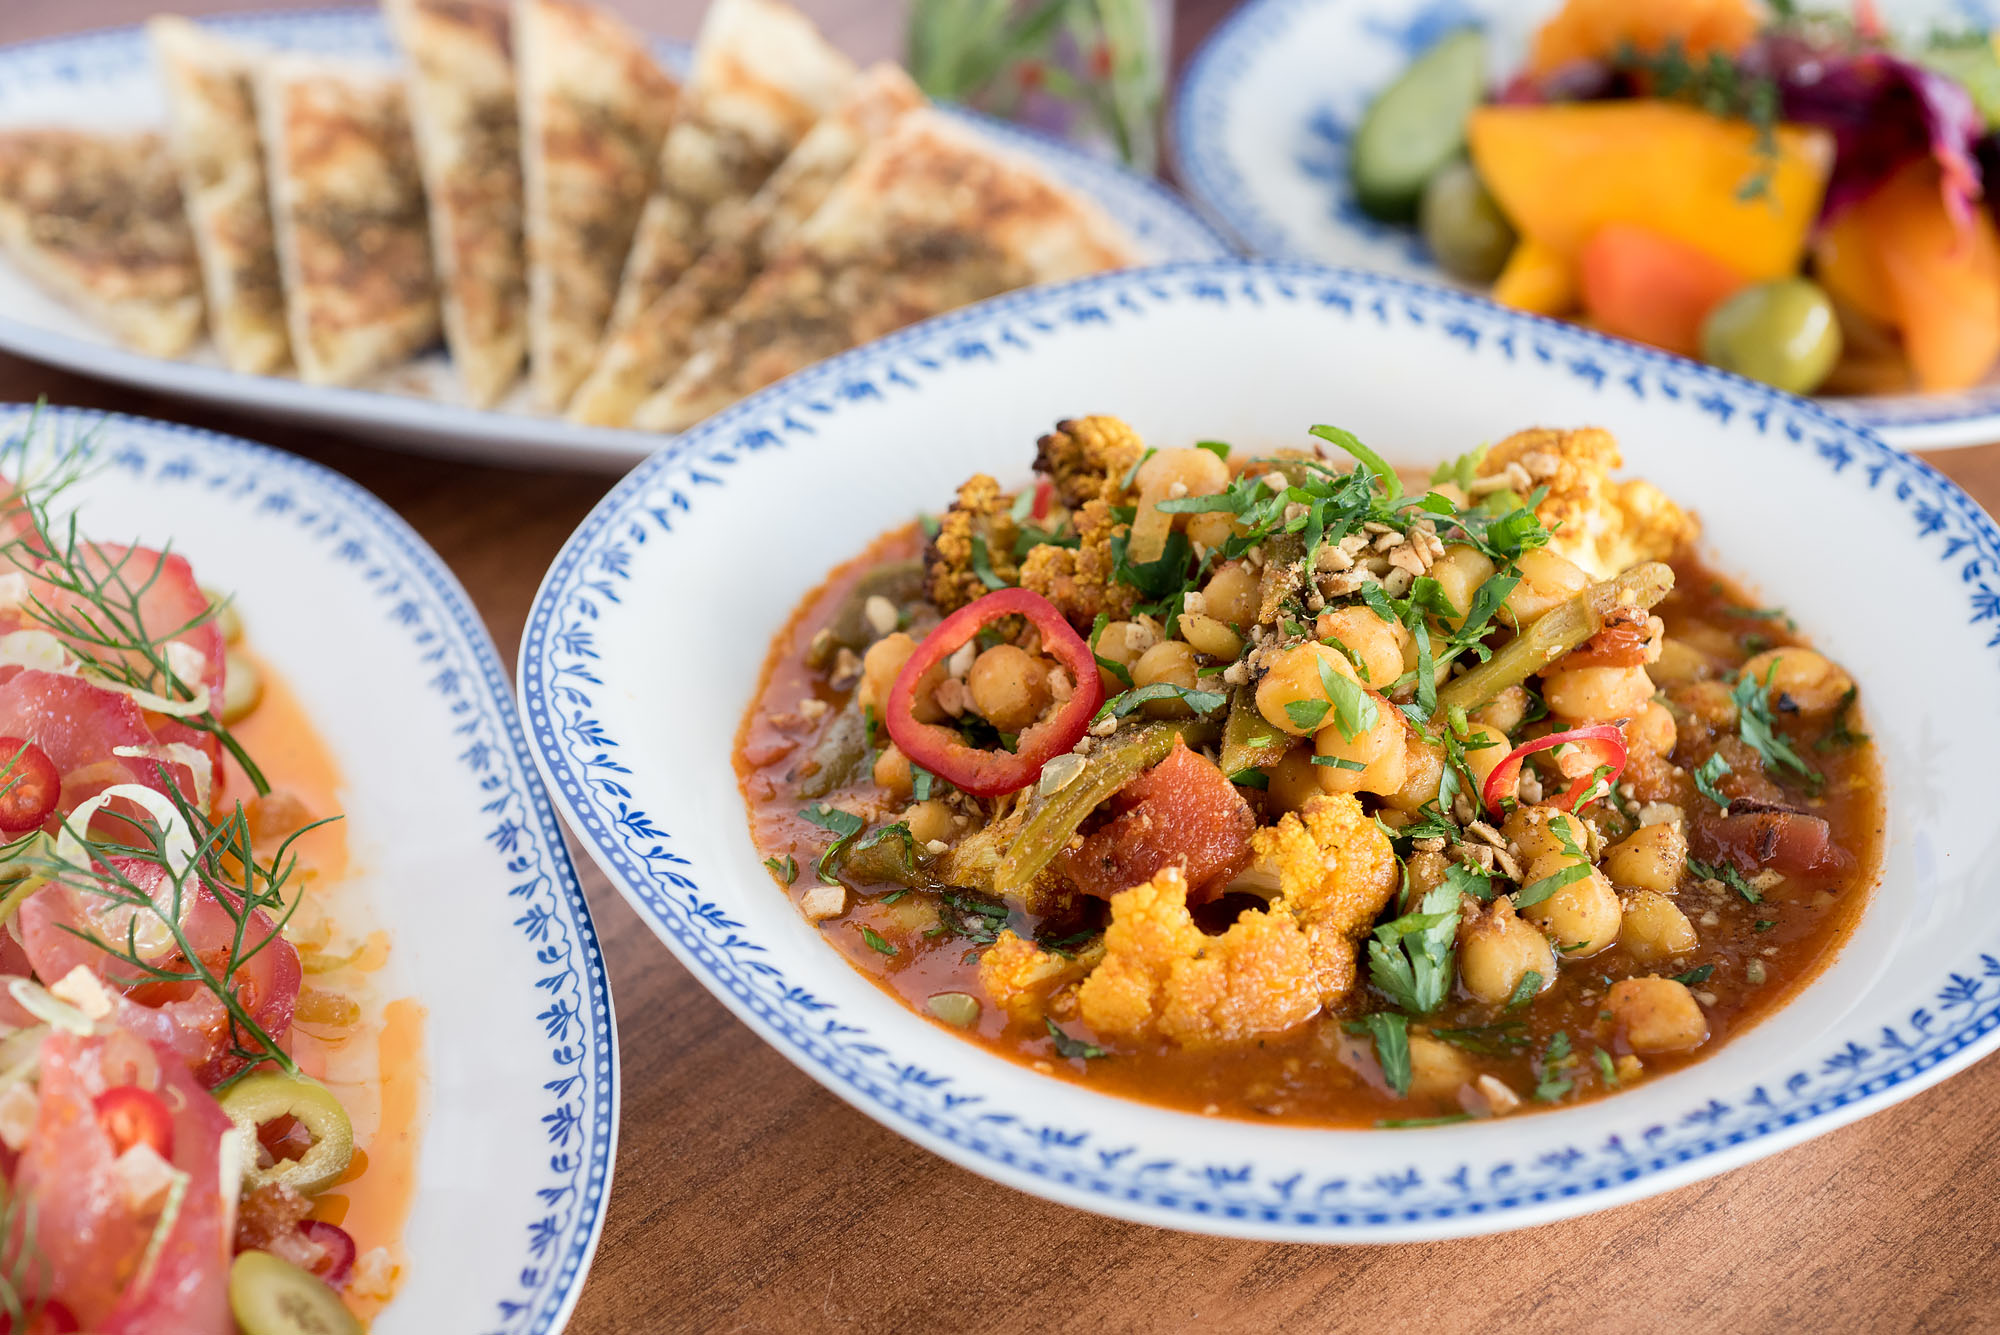 A spread of colorful Israeli food from Jaffa.